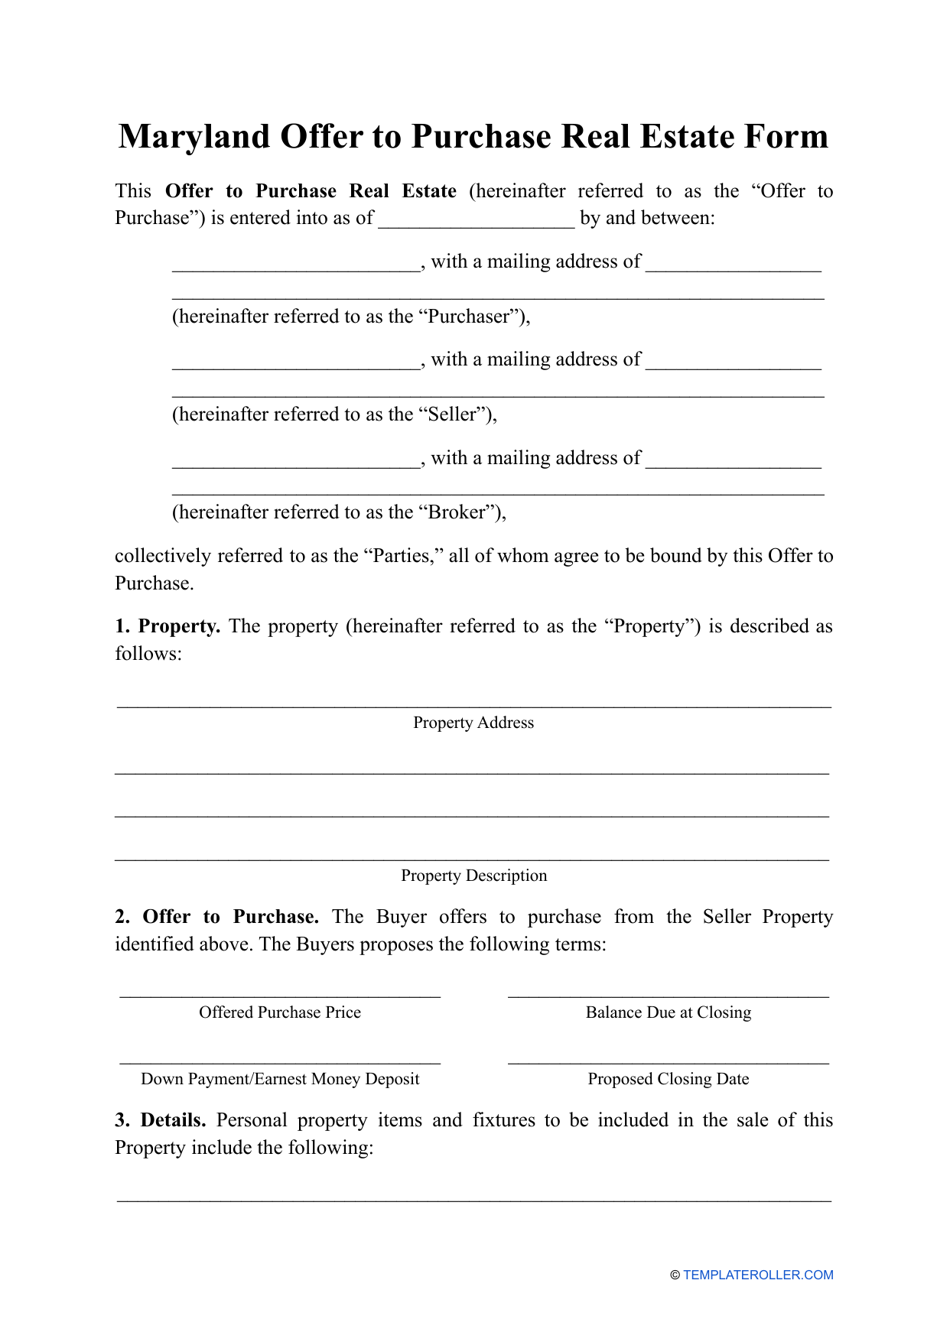 maryland-offer-to-purchase-real-estate-form-download-printable-pdf